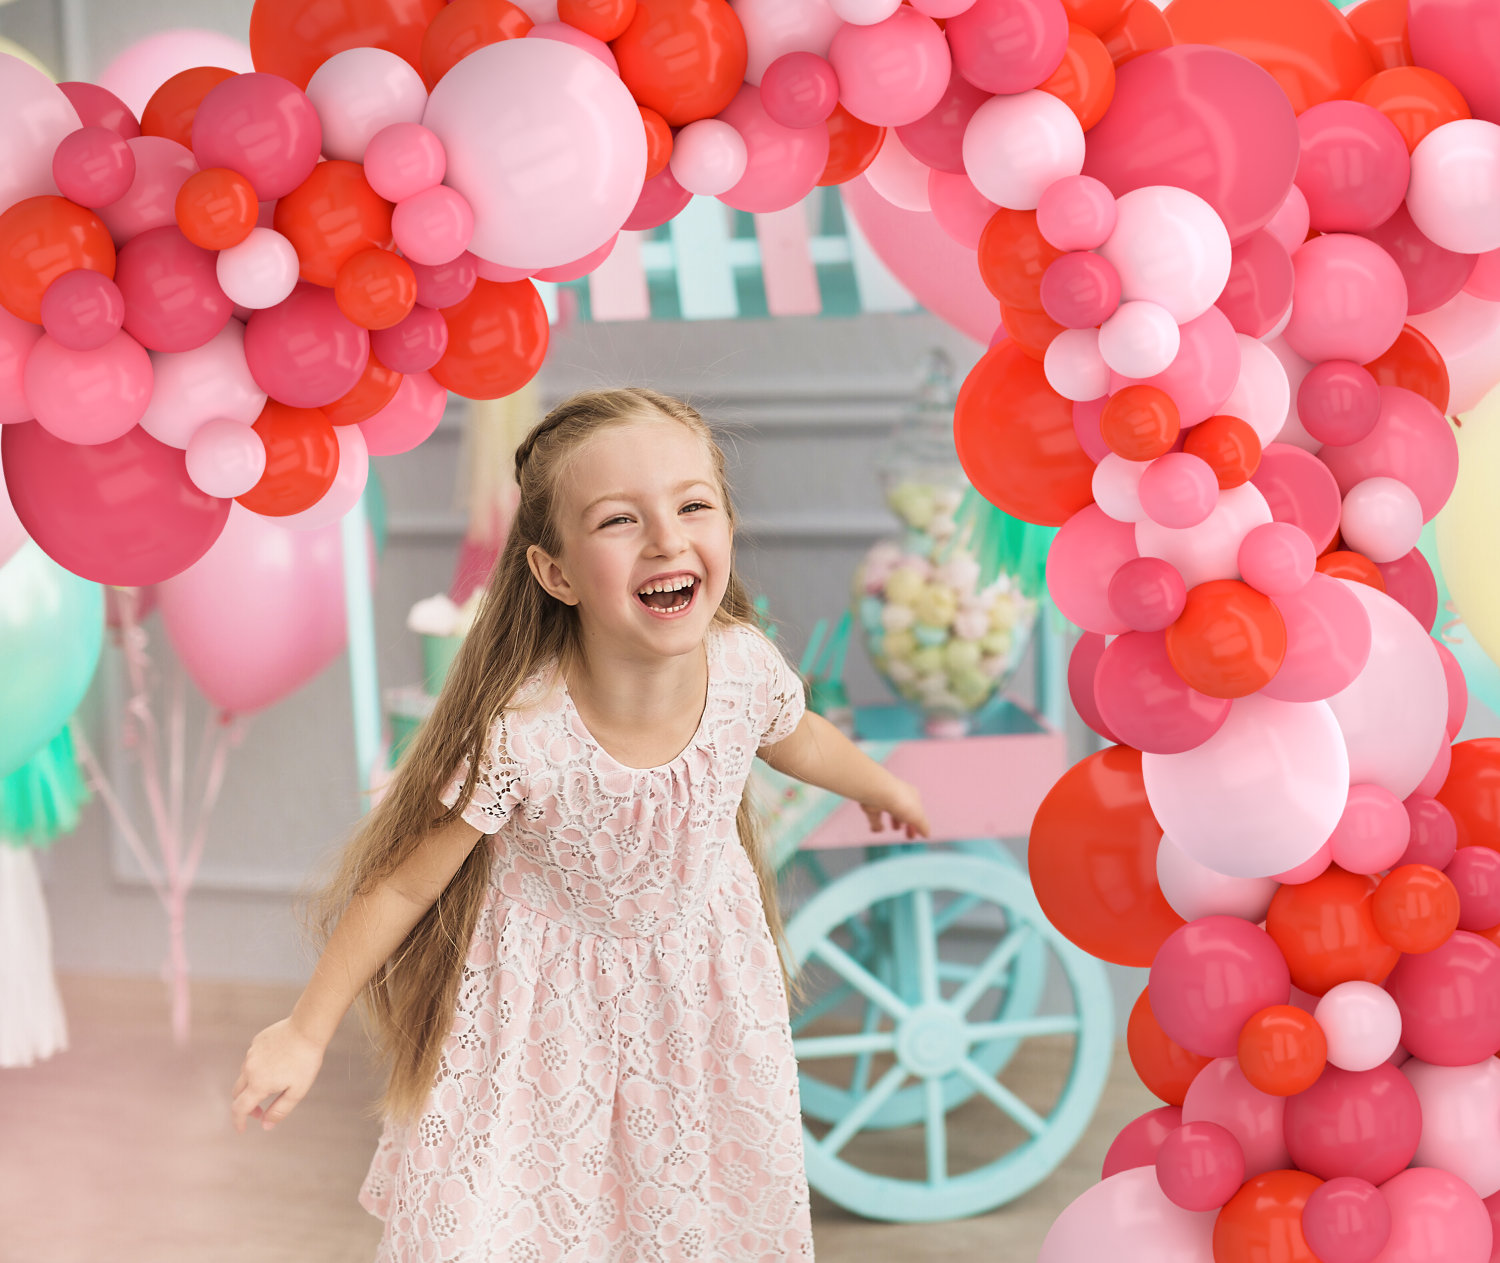 The Party Inc. Balloon Arch Kits